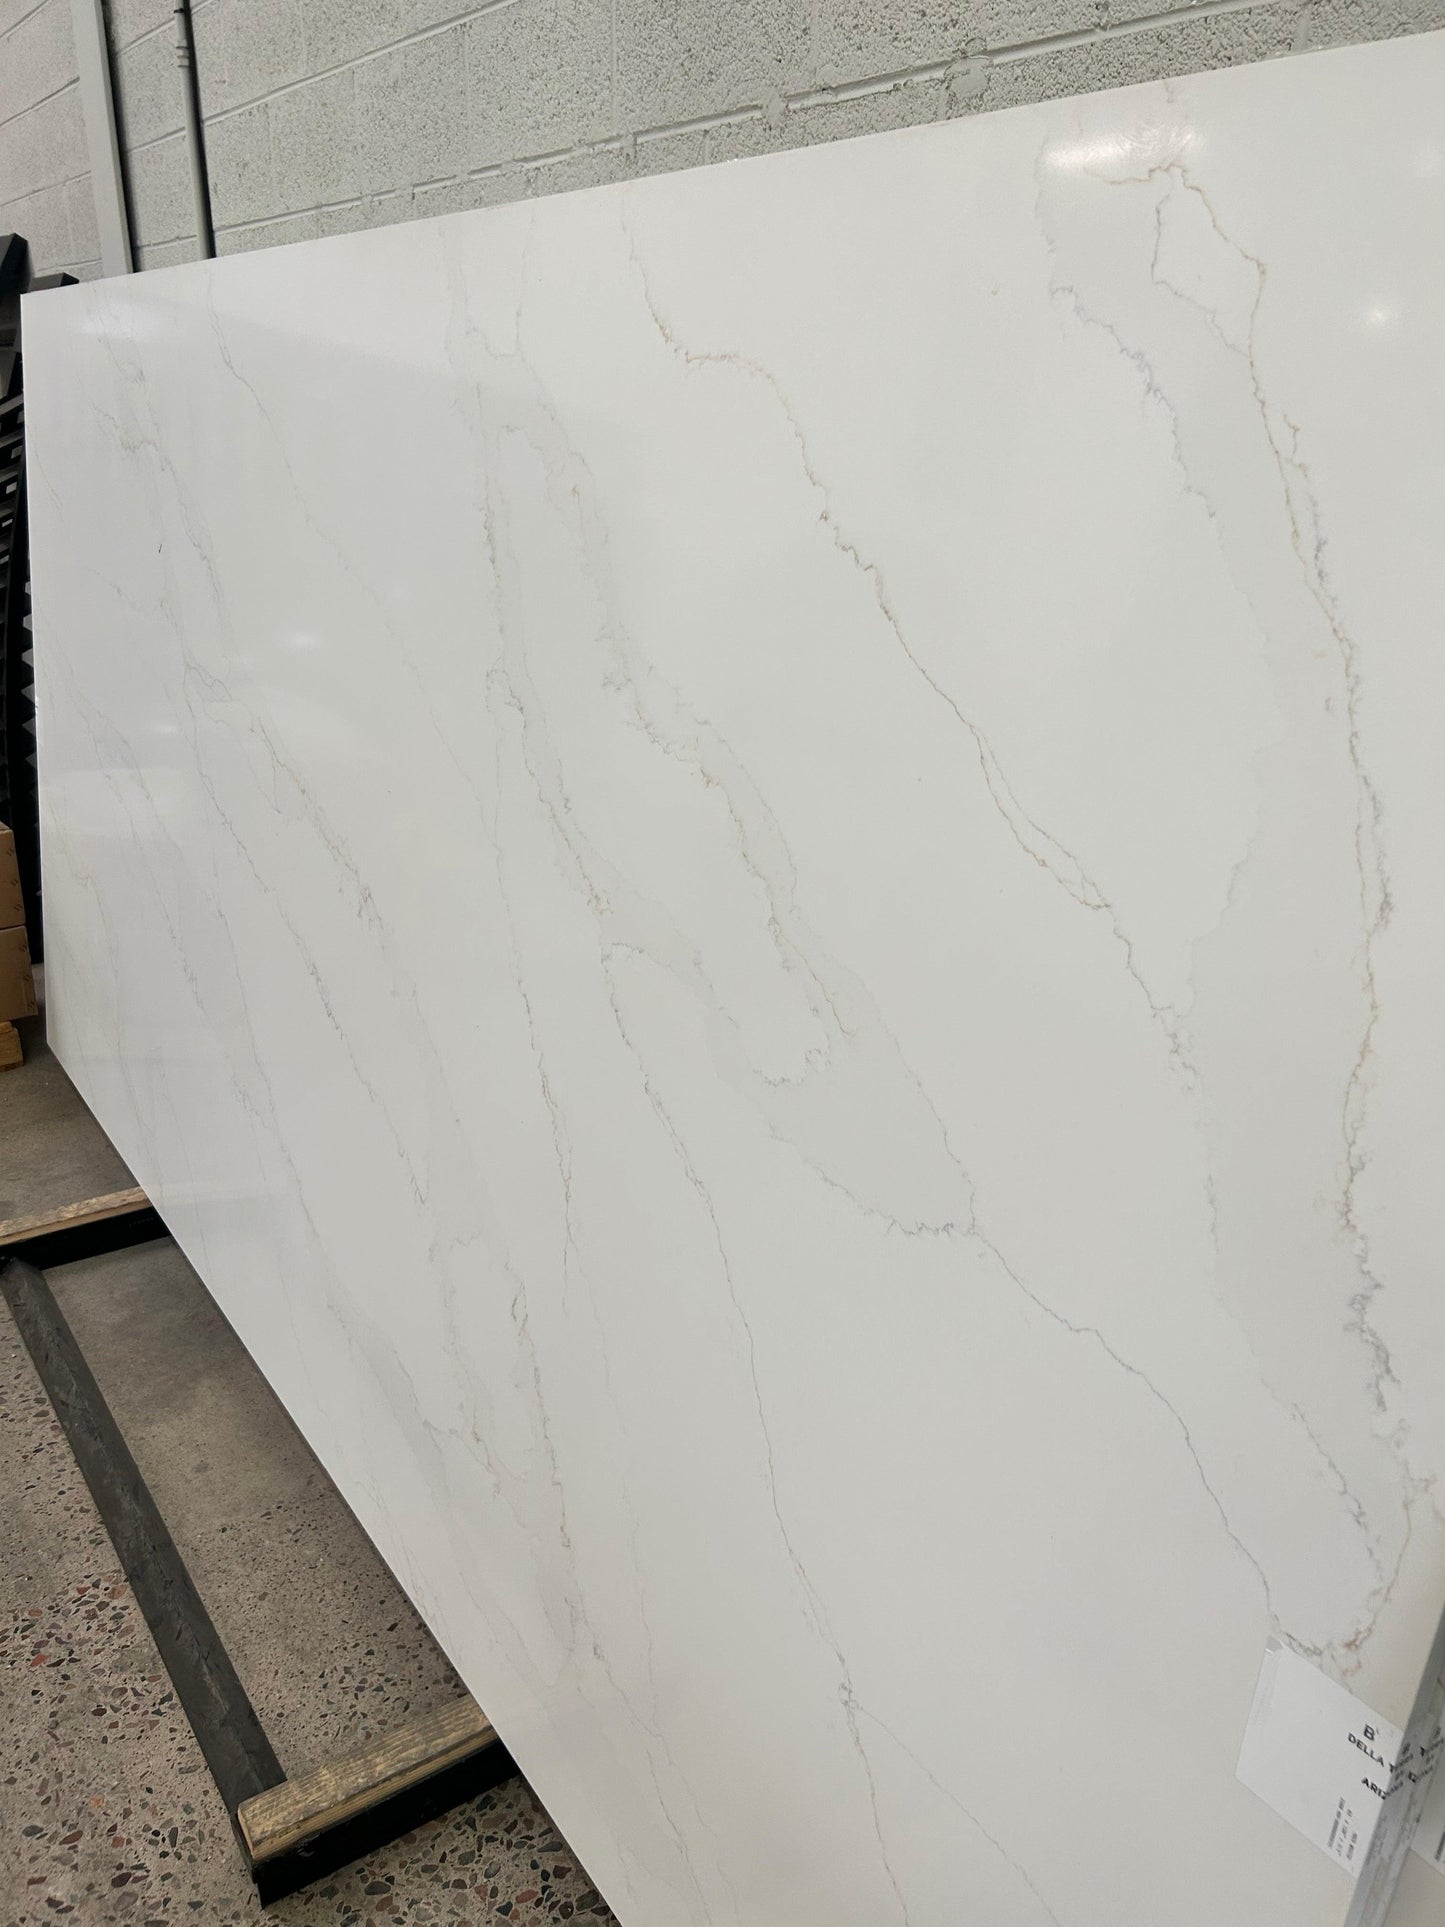 2cm, Bathroom, black, cabinets, Double, Full Slab, Glossy, gold, gold veins, gray, Gray Veins, Grey, Grey Veins, Marble, Outlet Material, Quartz, quartz-slabs, Rare Find, Single, Sink, sinks, thickness-2cm, Veins, white, White Quartz, White Veins Quartz Full Slab